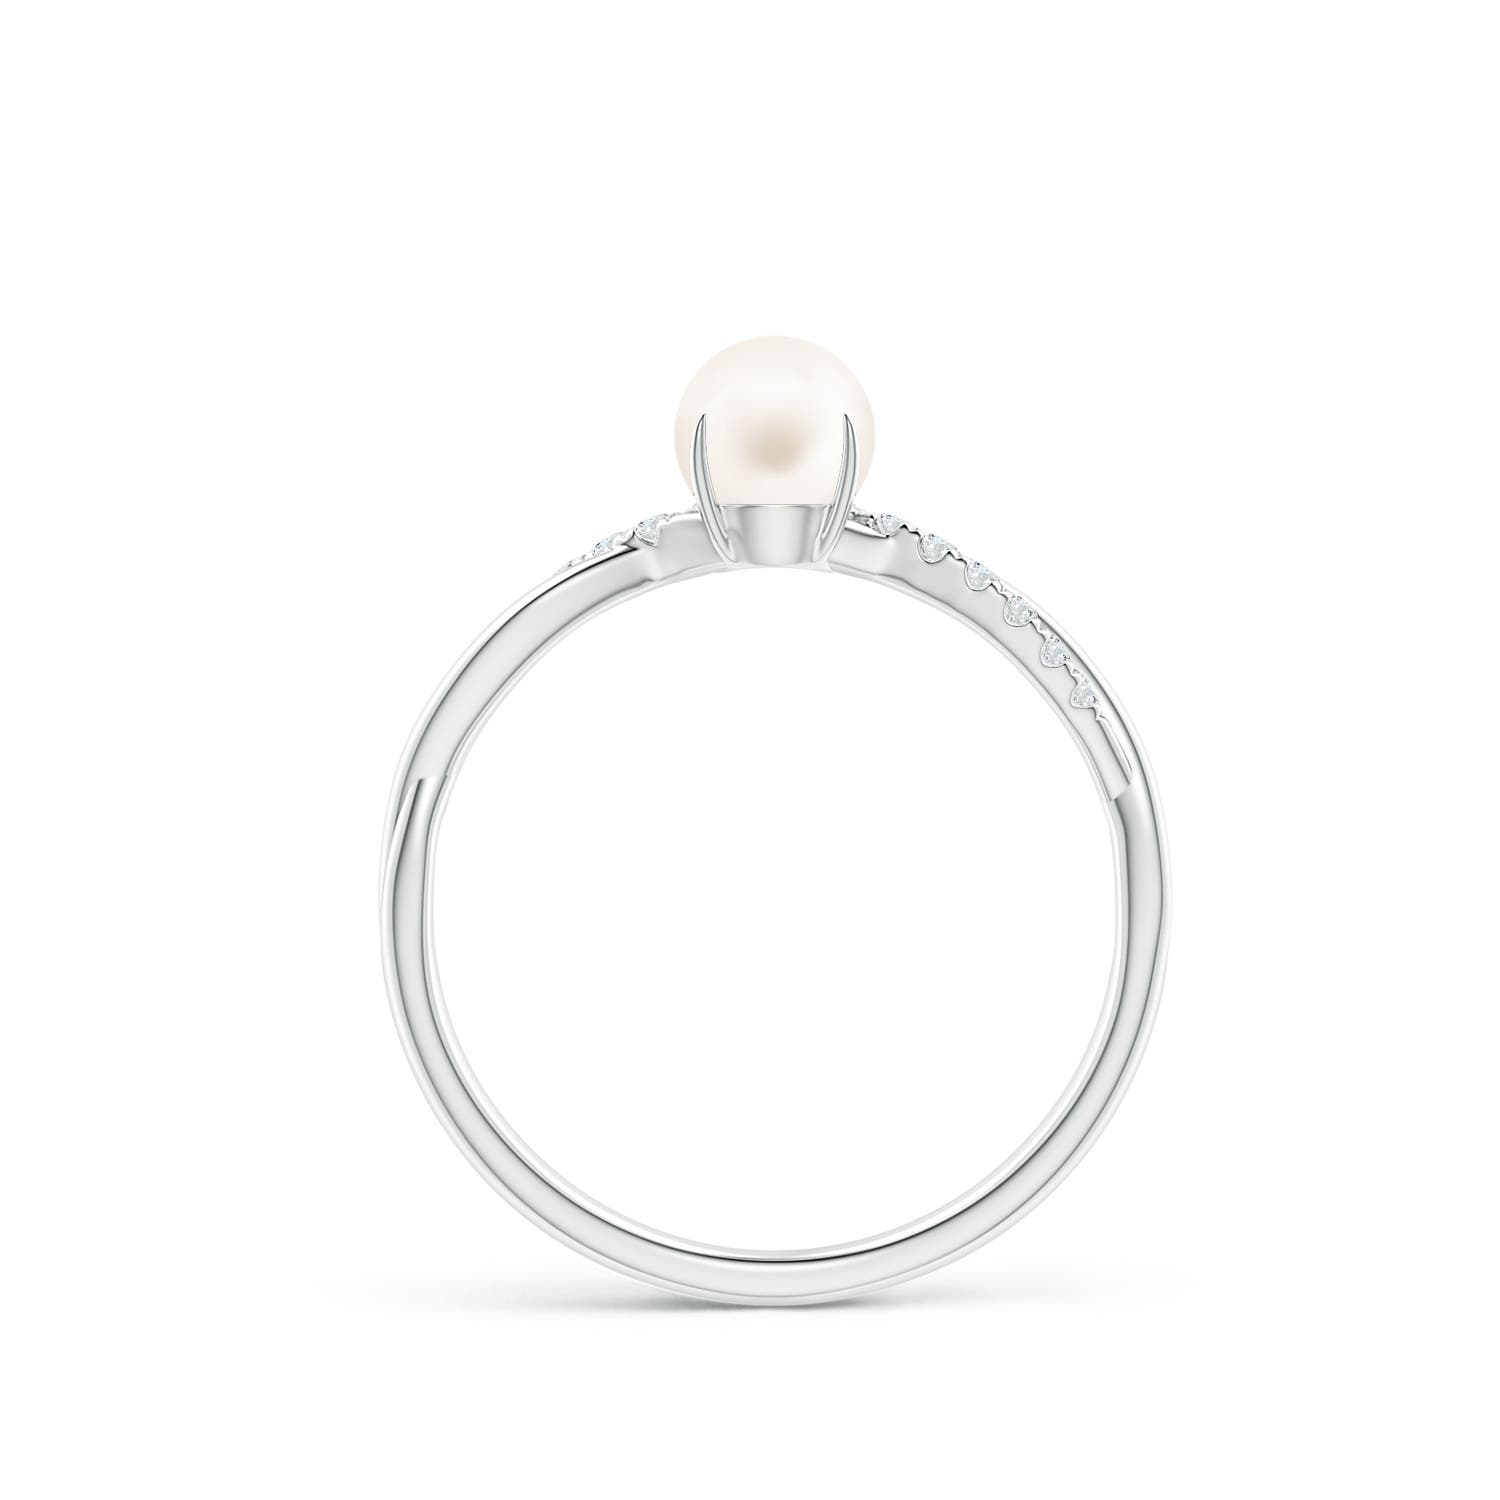 AA / 0.96 CT / 14 KT White Gold